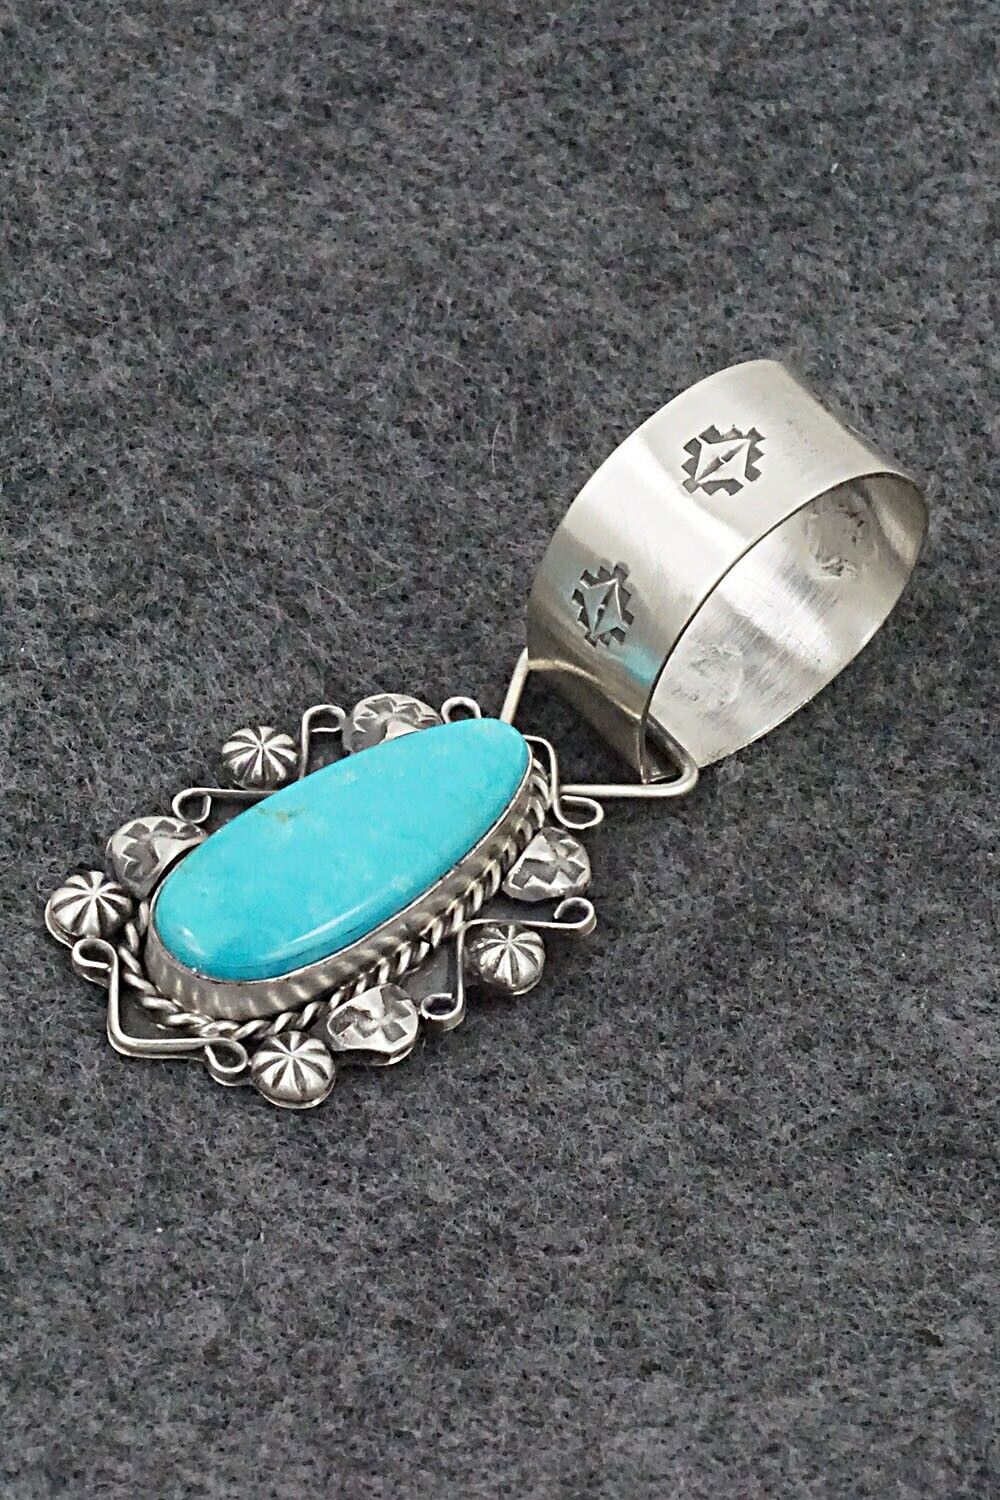 Turquoise and Sterling Silver Pendant - Wilson Dawes